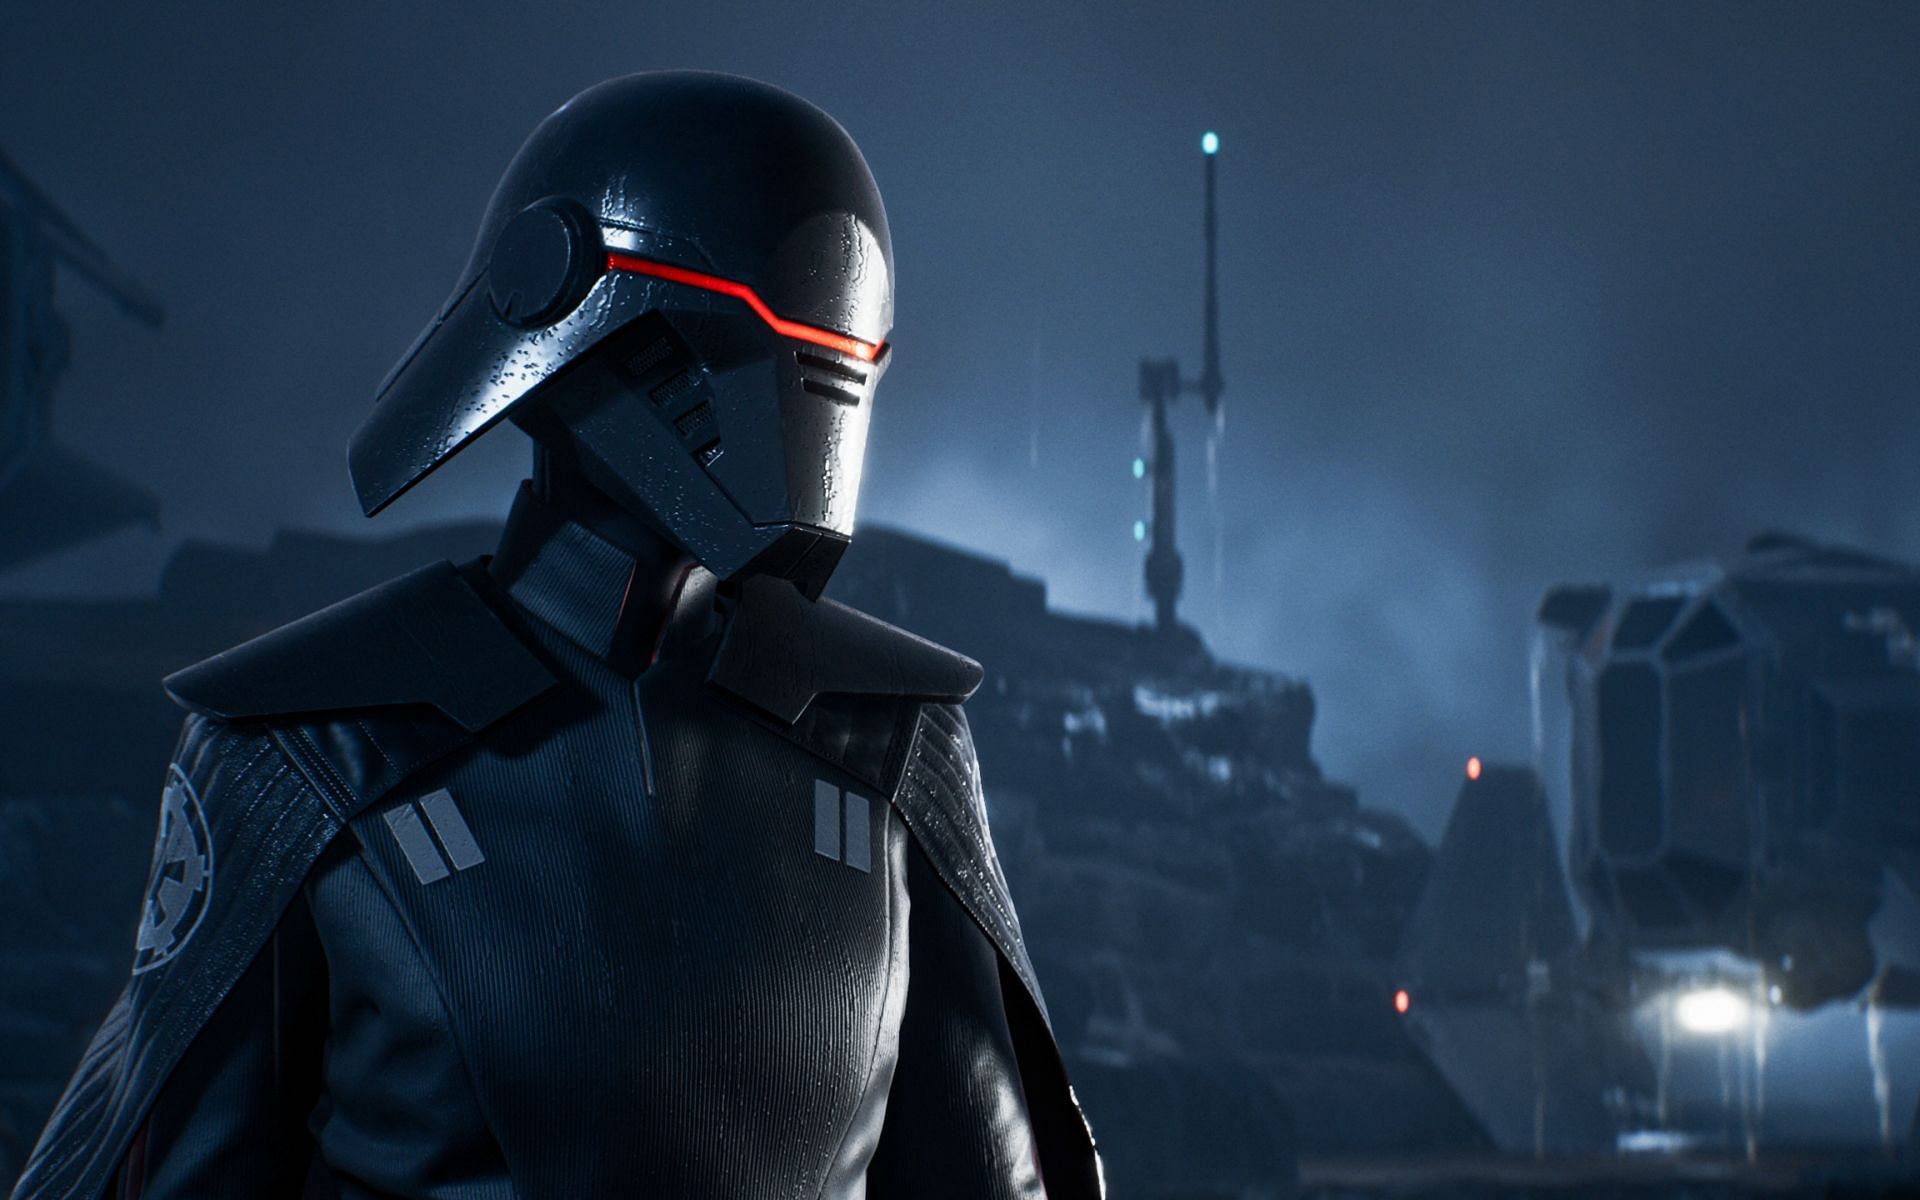 Star Wars Jedi: Fallen Order is a spectacular action-adventure game (Image via EA)